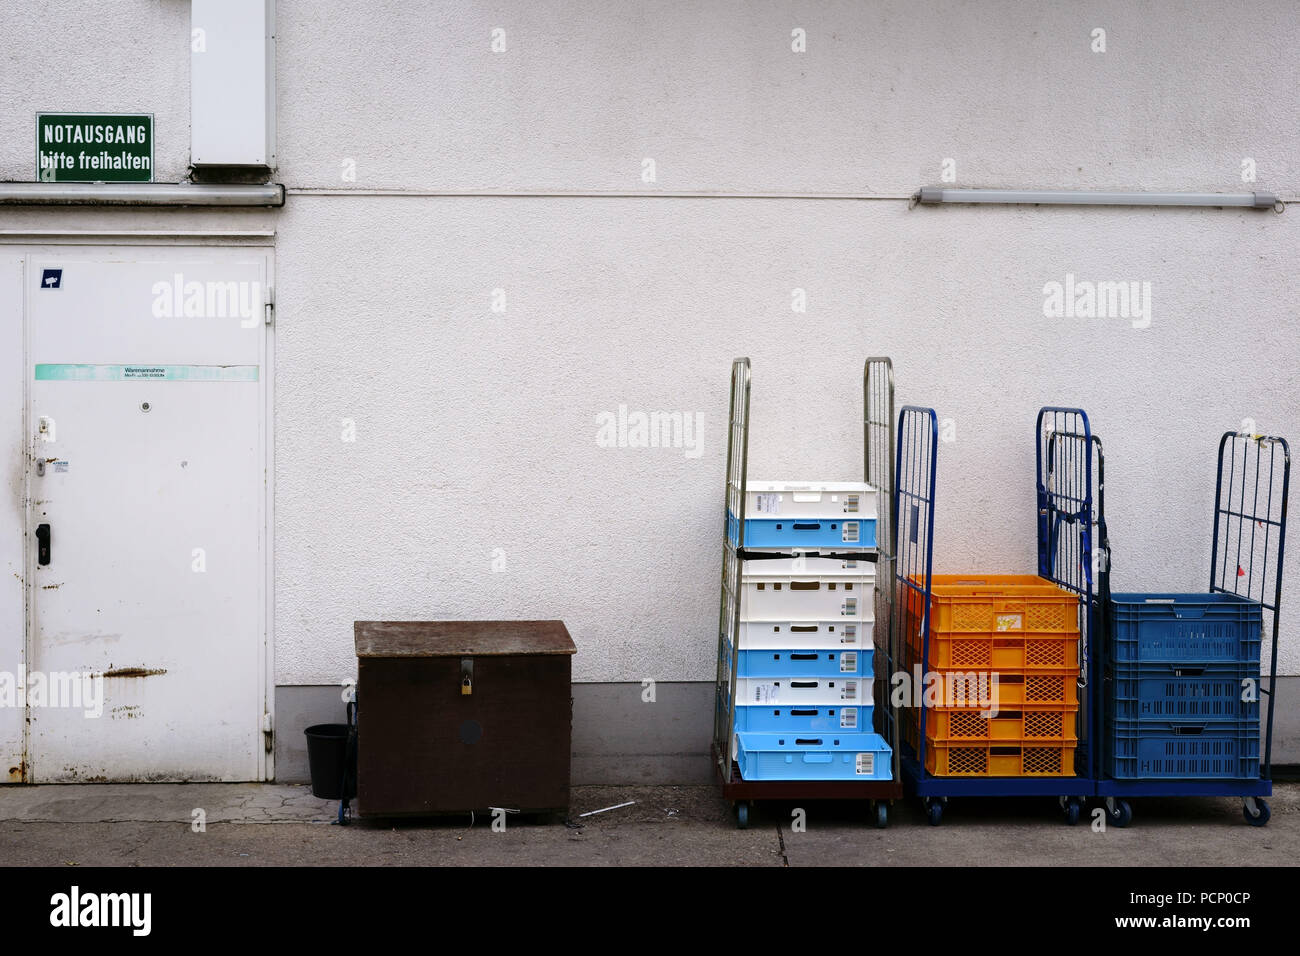 A receiving of goods at the back entrance of a grocery store with boxes and pallets on rollable loading areas. Stock Photo